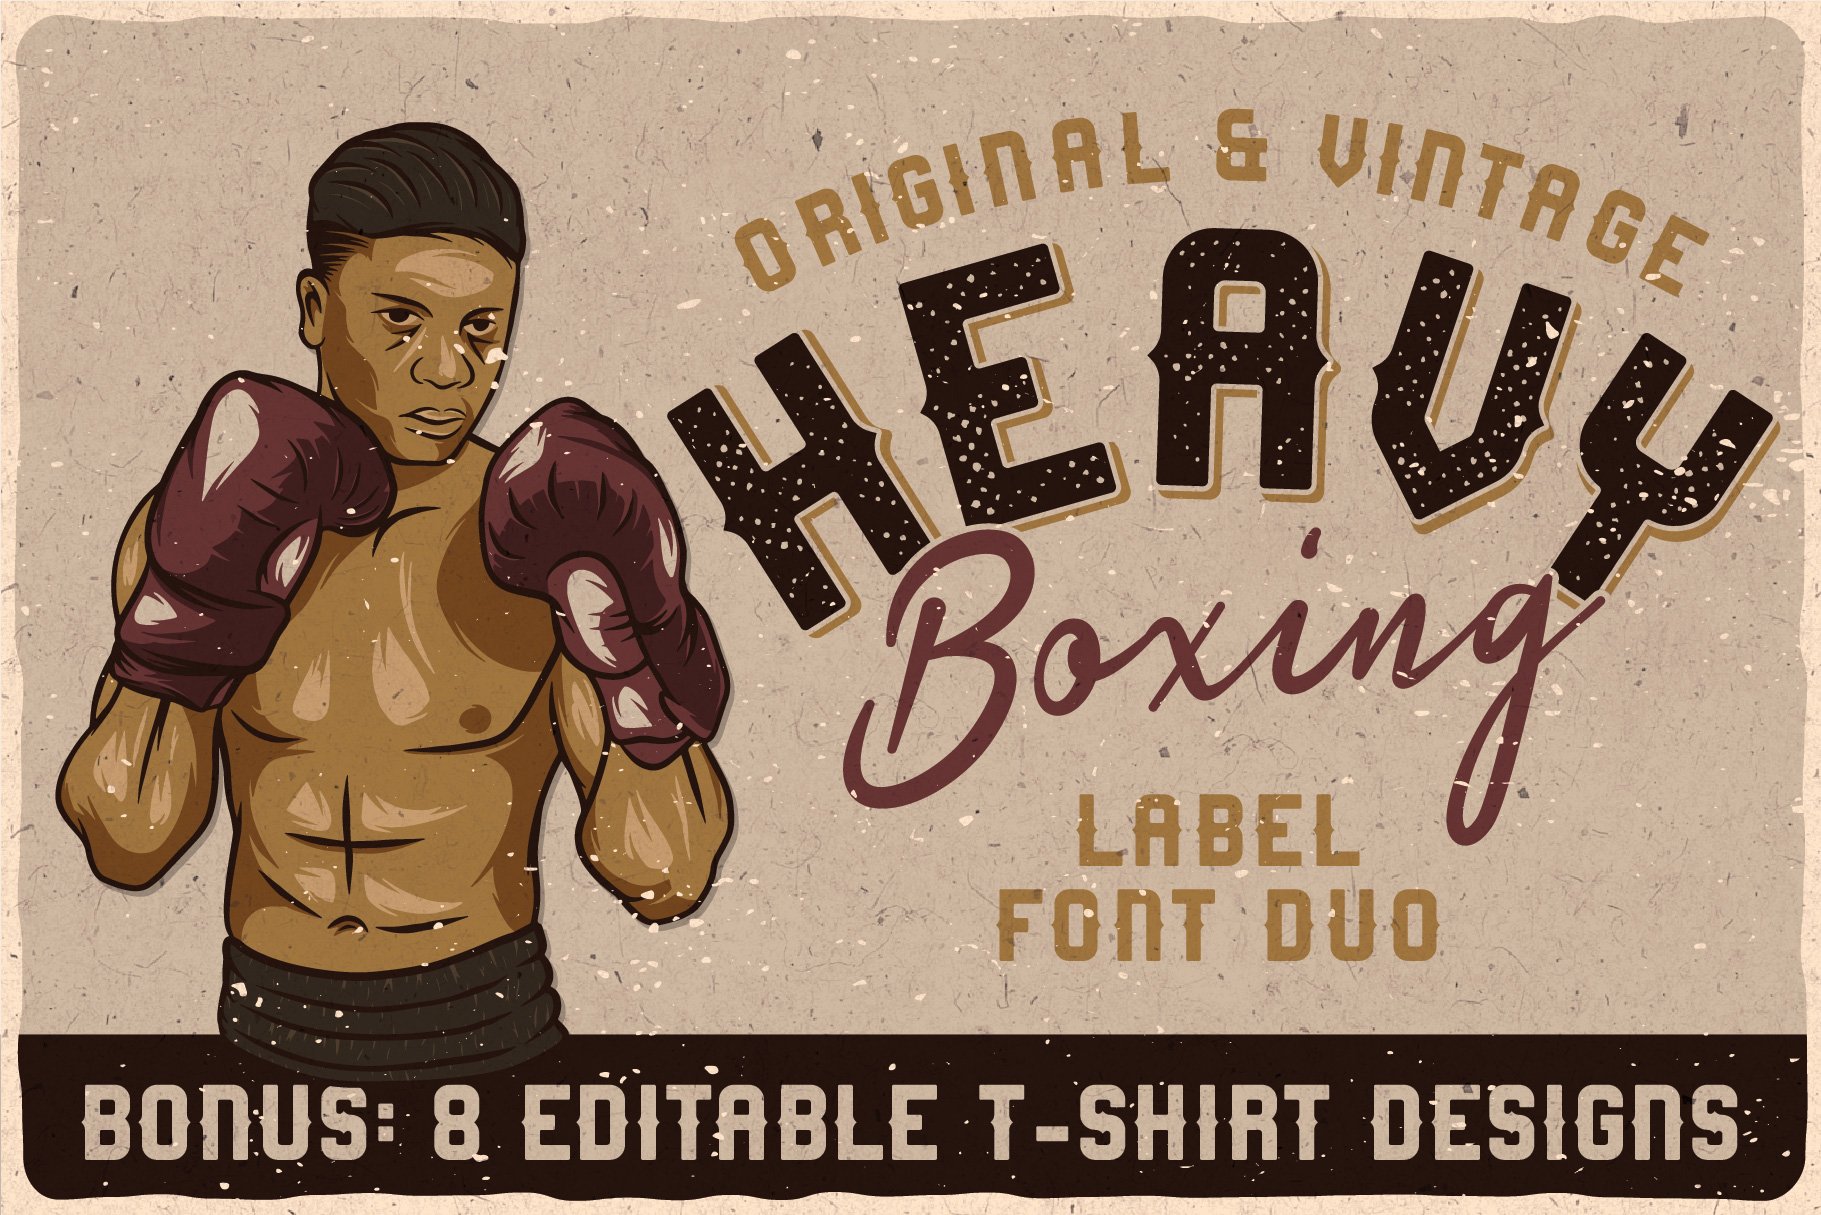 Heavy Boxing. Font Duo cover image.